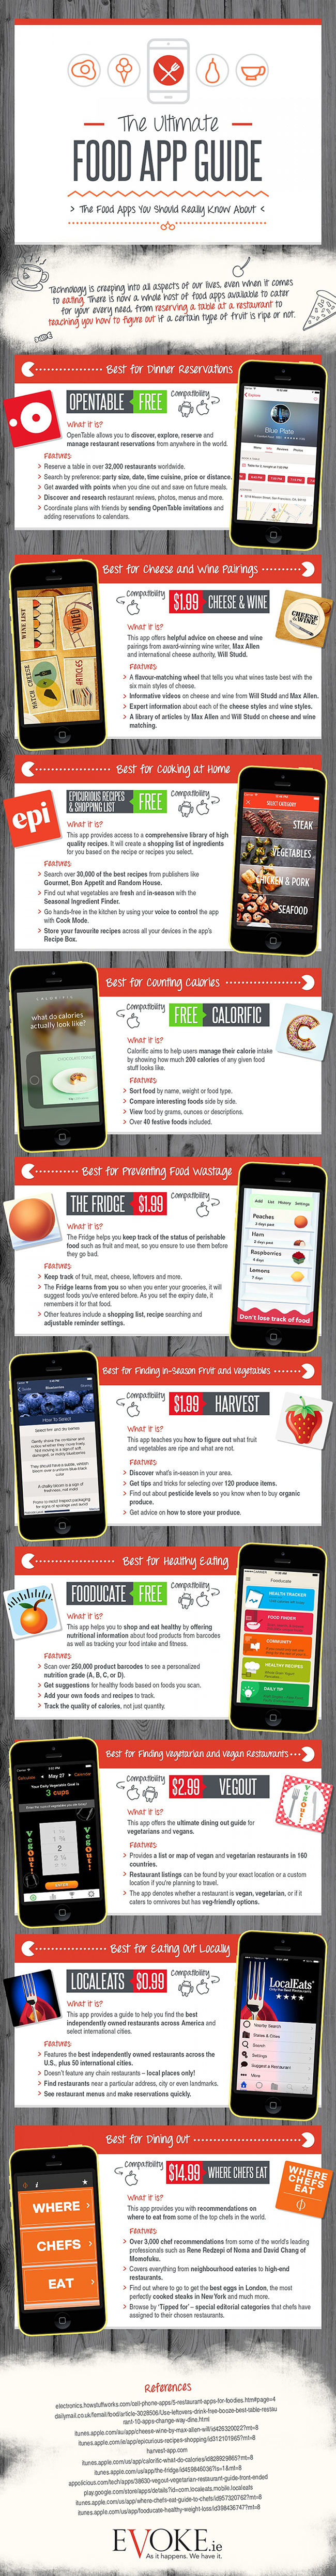 the-food-apps-you-should-really-know-about--infographic_55d6cb82e926b_w1500